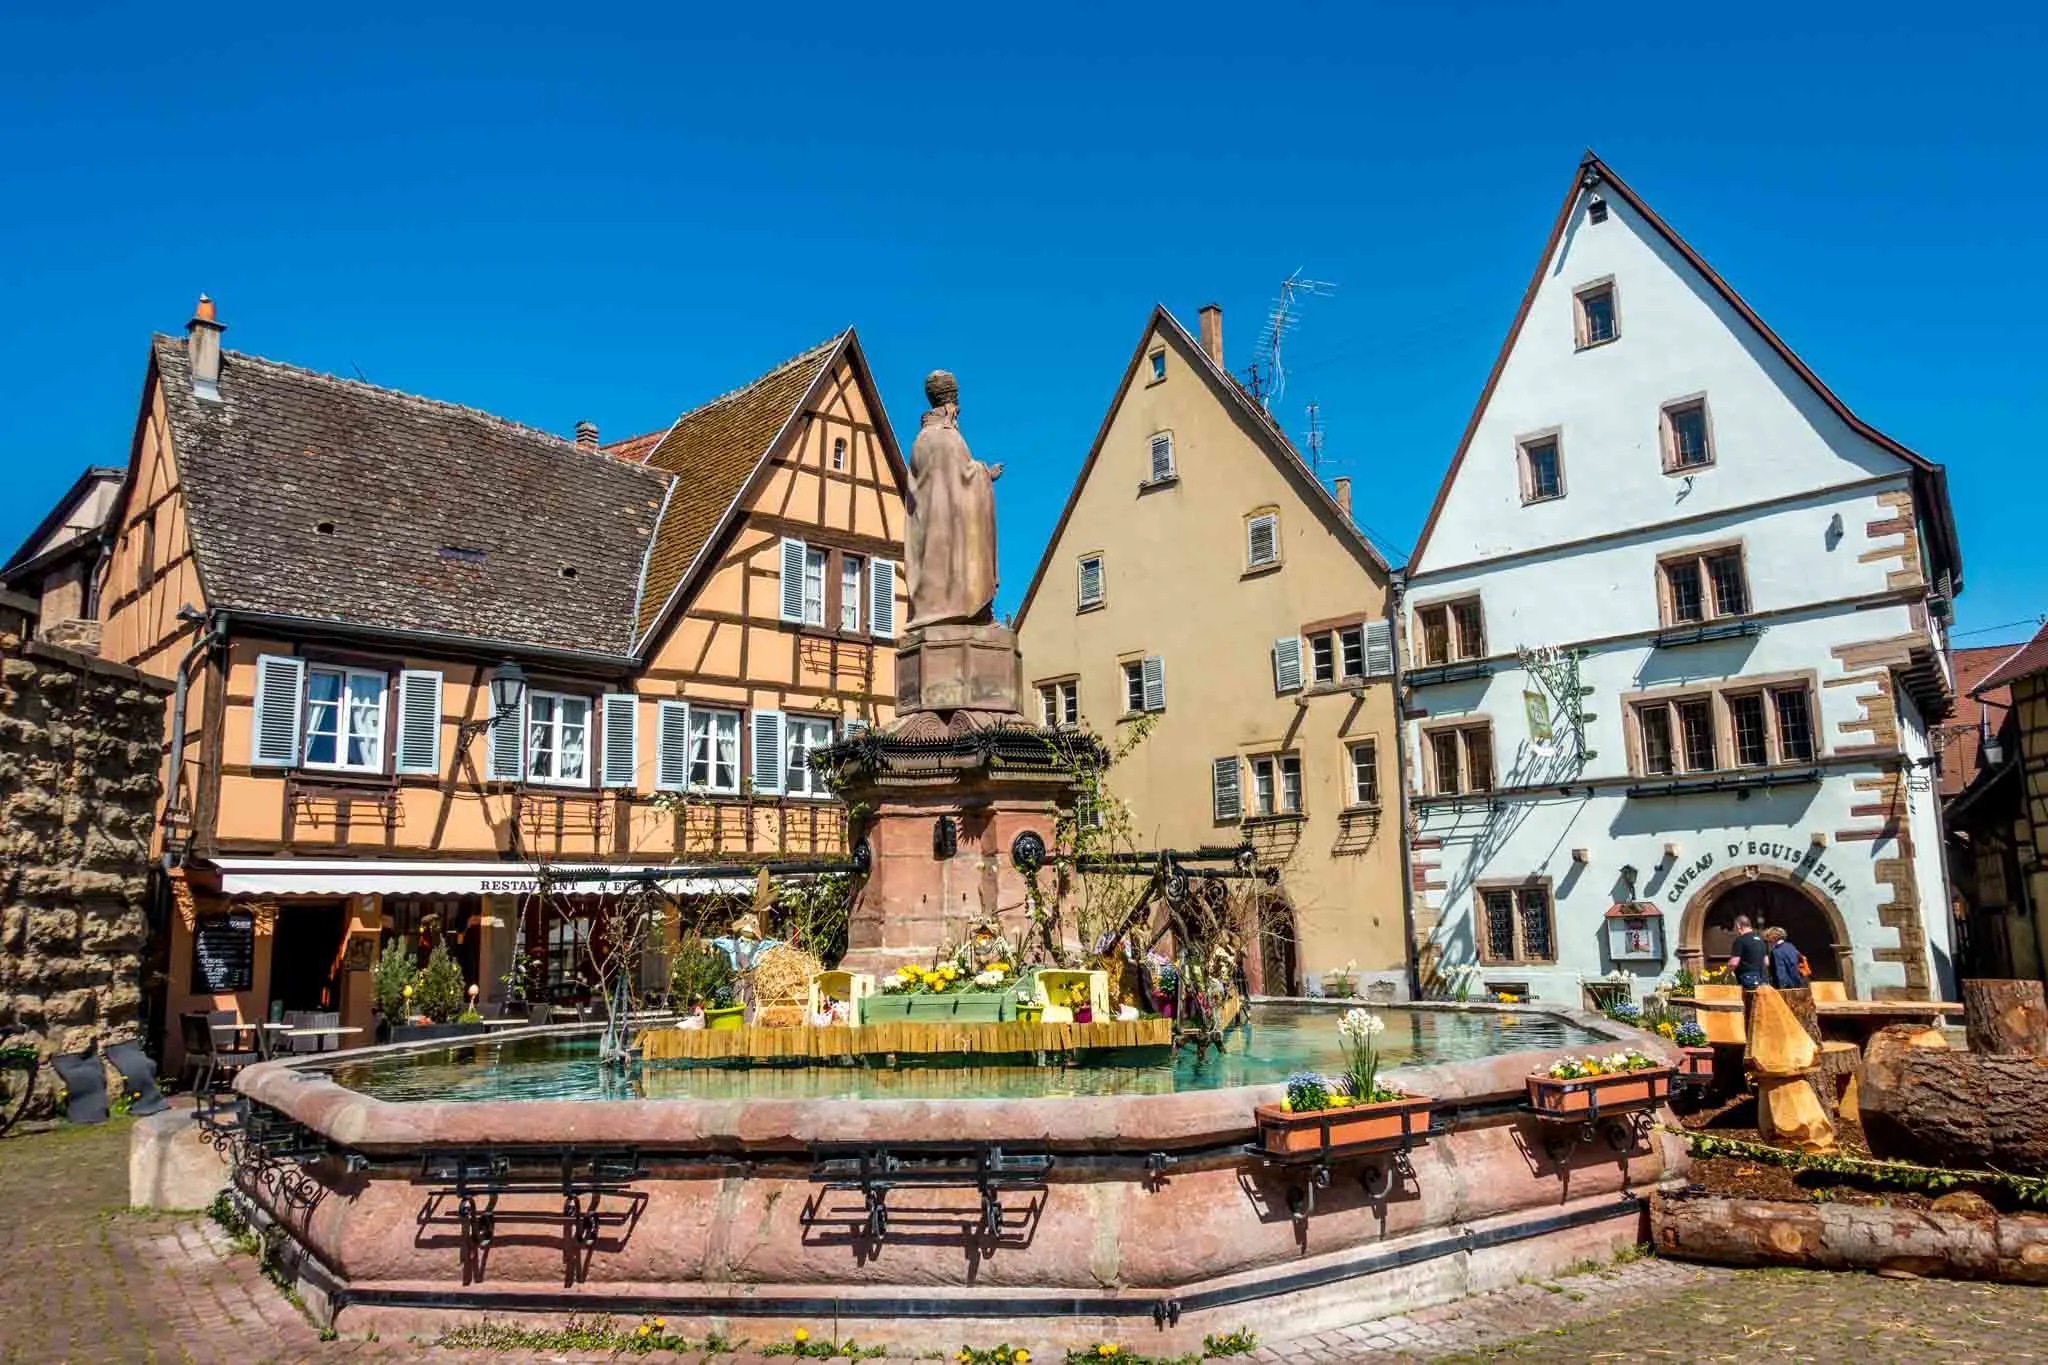 Fountain and buildings in Eguisheim town square on the Alsace wine route